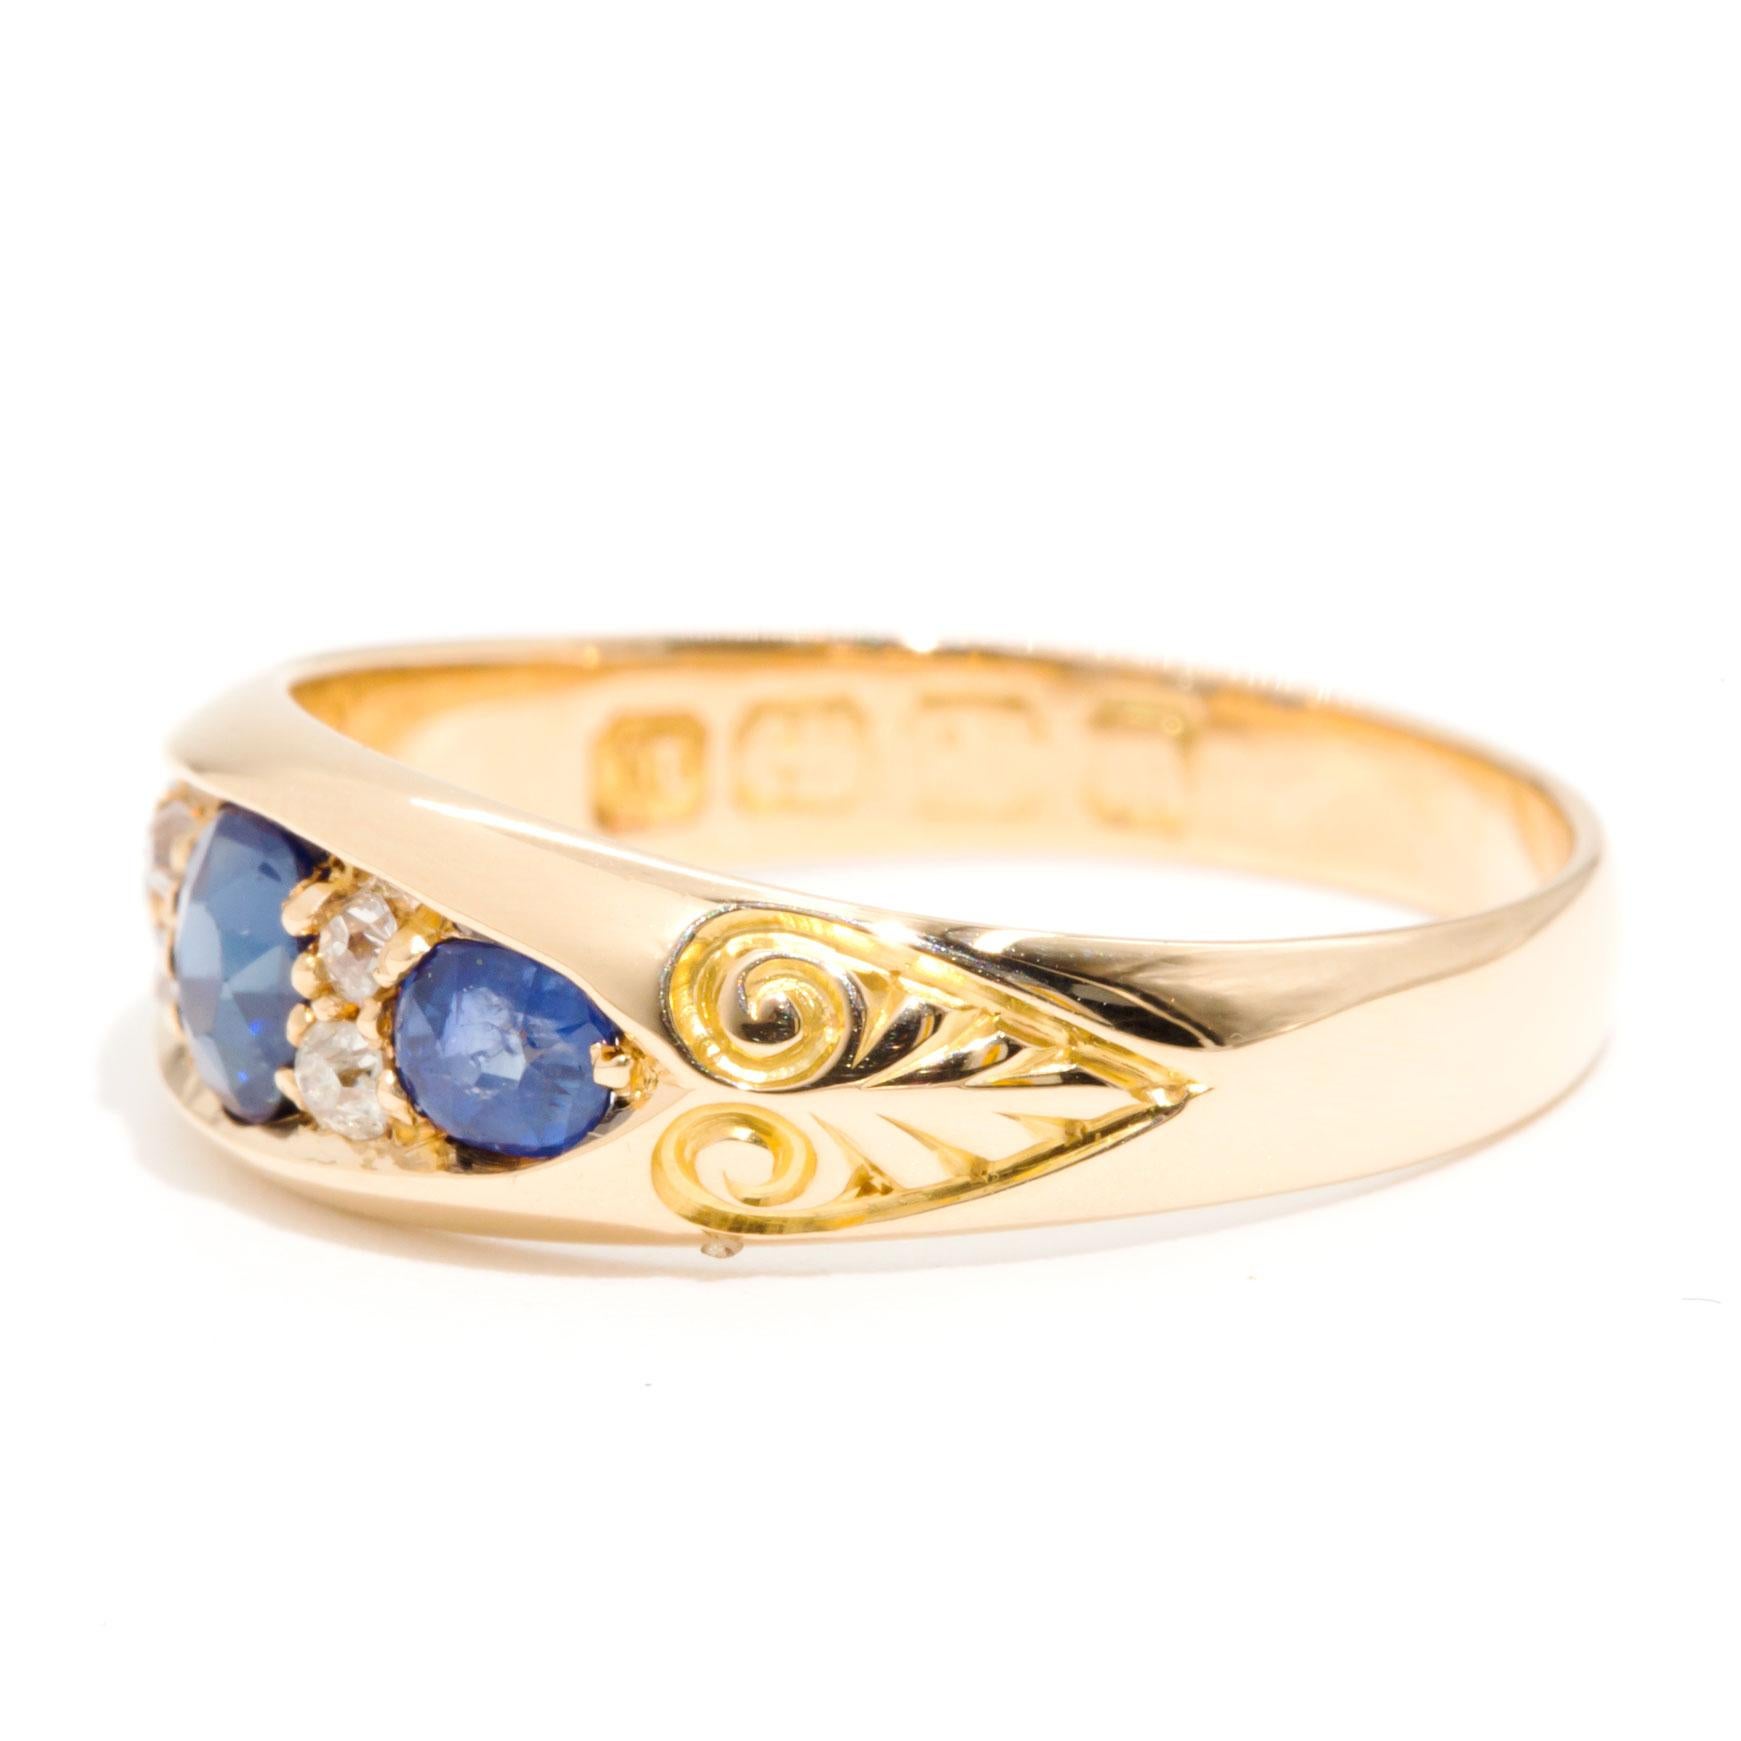 Old European Cut Diamond and Blue Sapphire 18 Carat Yellow Gold Vintage Ring  For Sale 2